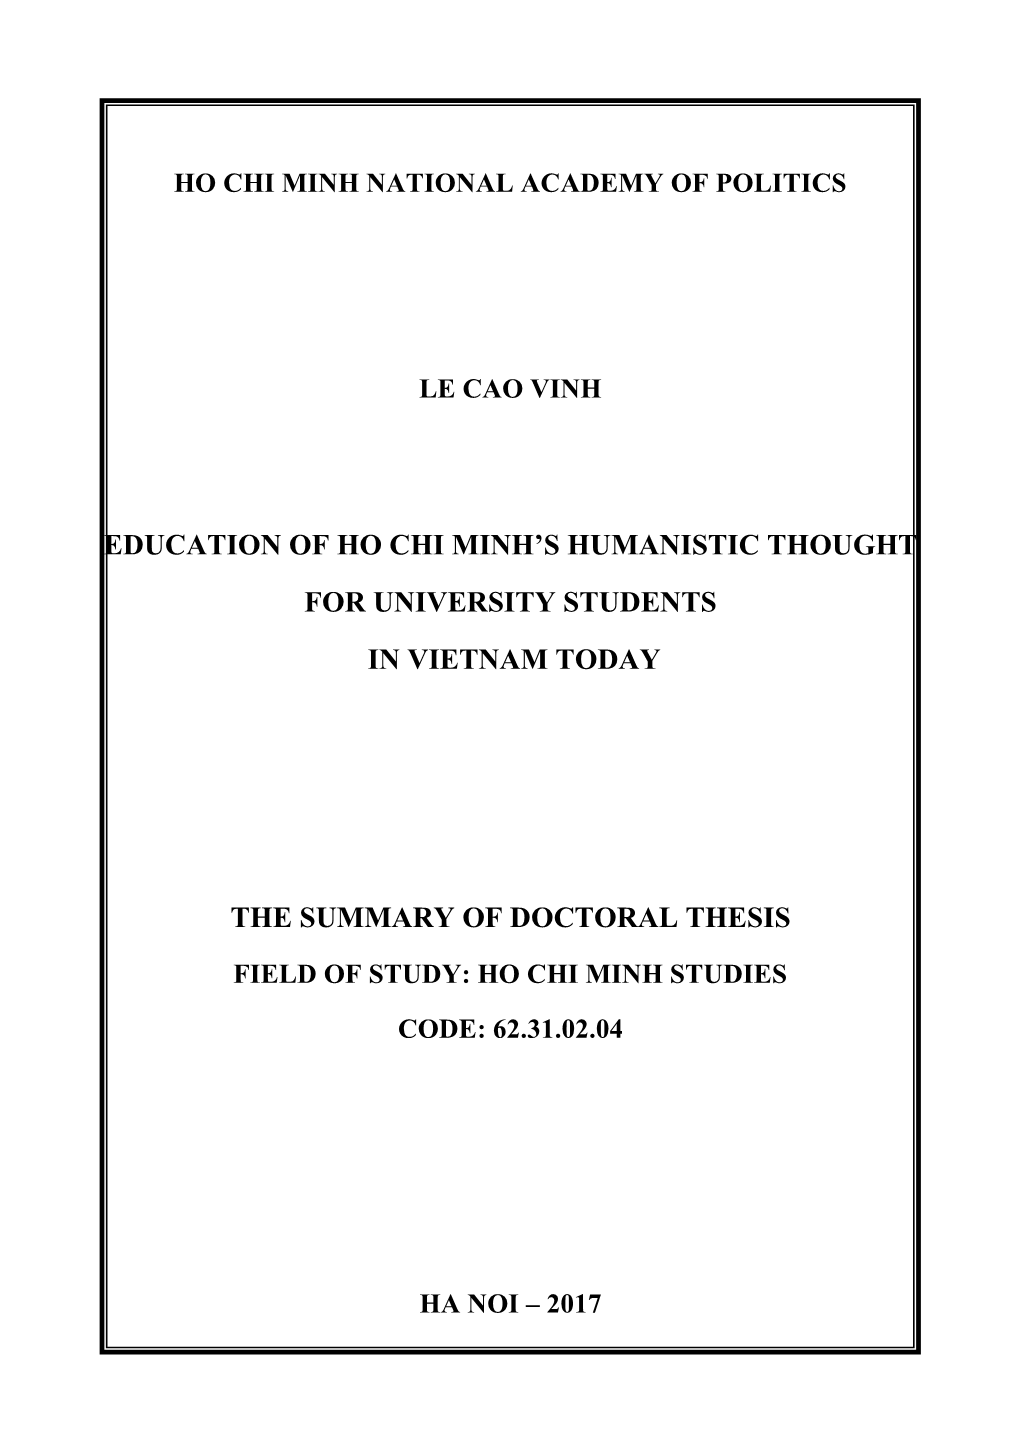 Education of Ho Chi Minh's Humanistic Thought for University Students In